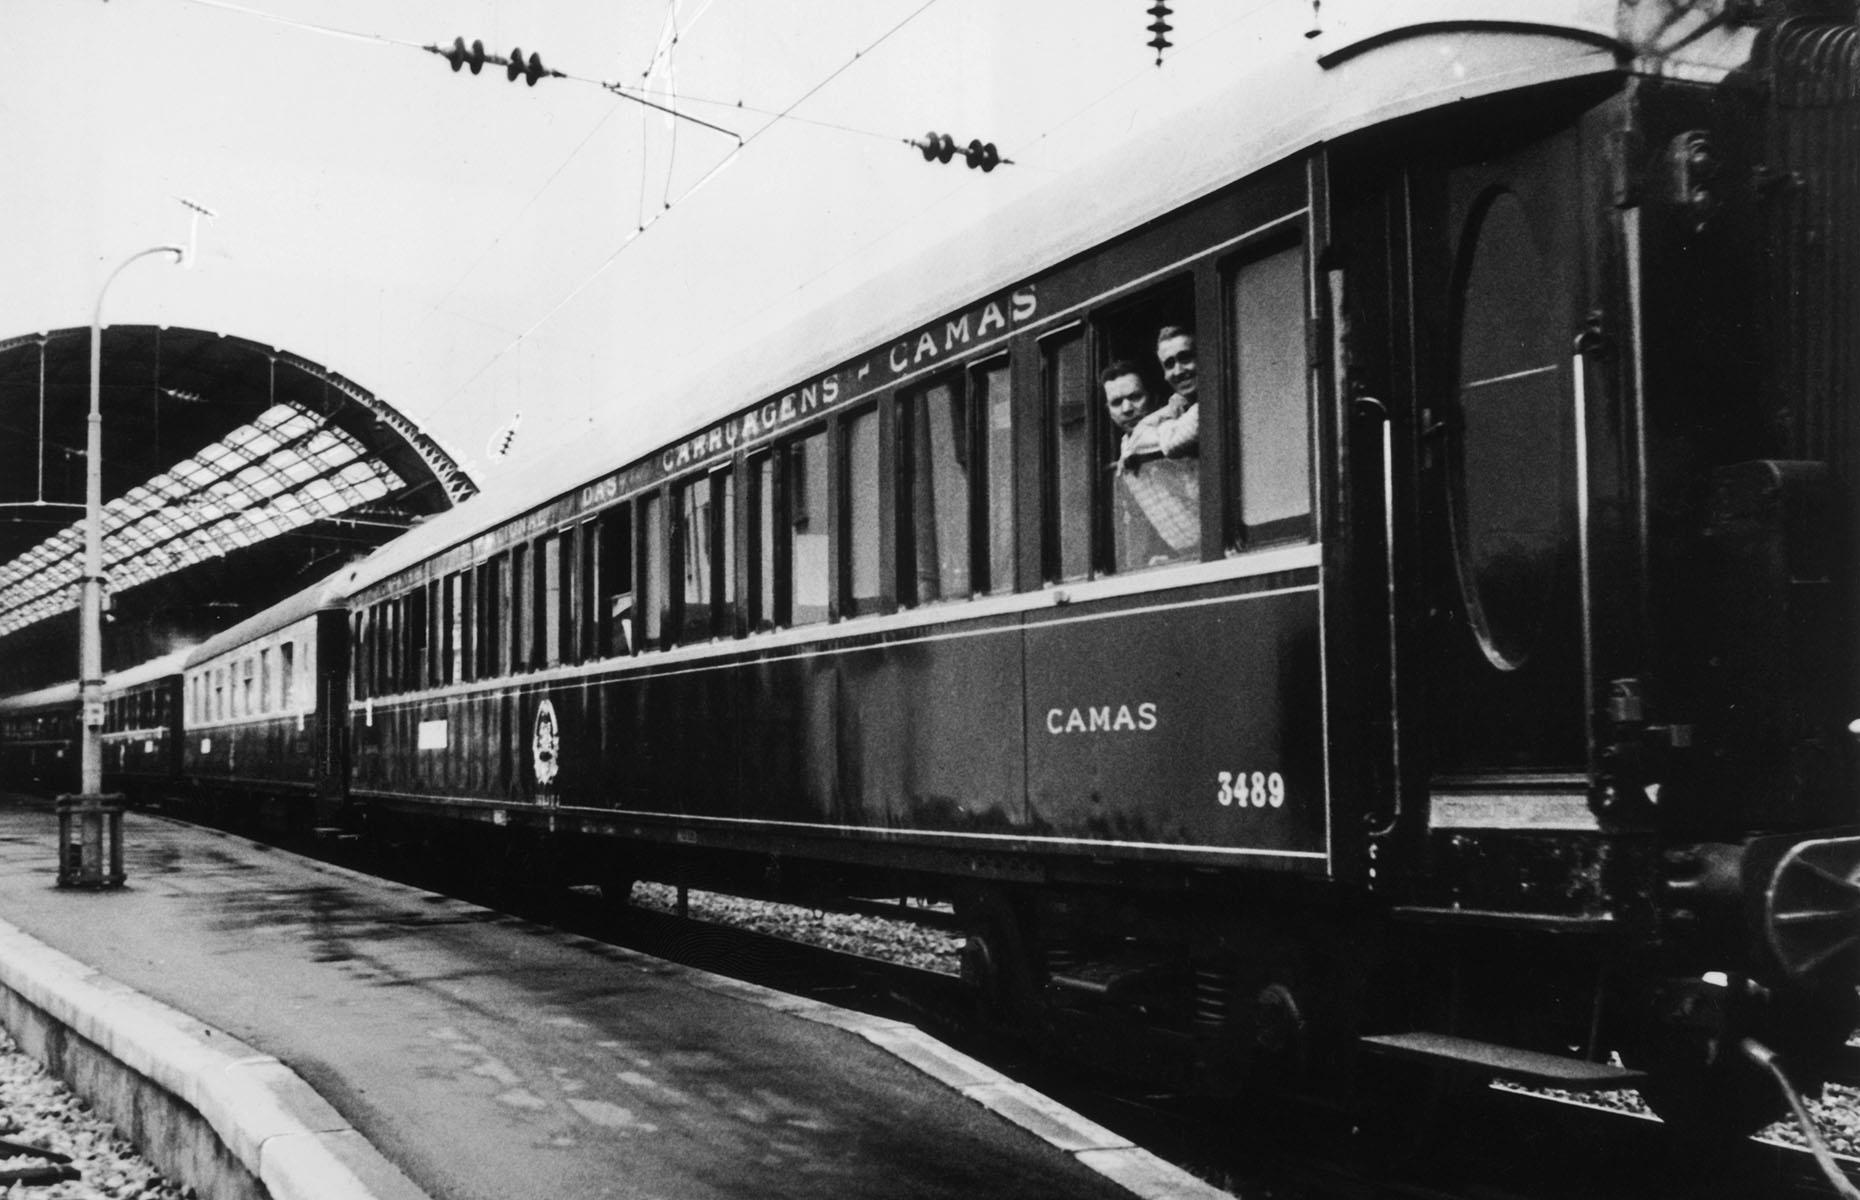 <p>A bittersweet moment is captured here in October 1977 as the Orient Express, the glamorous long-distance passenger service, stops in Monte Carlo along its final direct journey from Paris to Istanbul.</p>